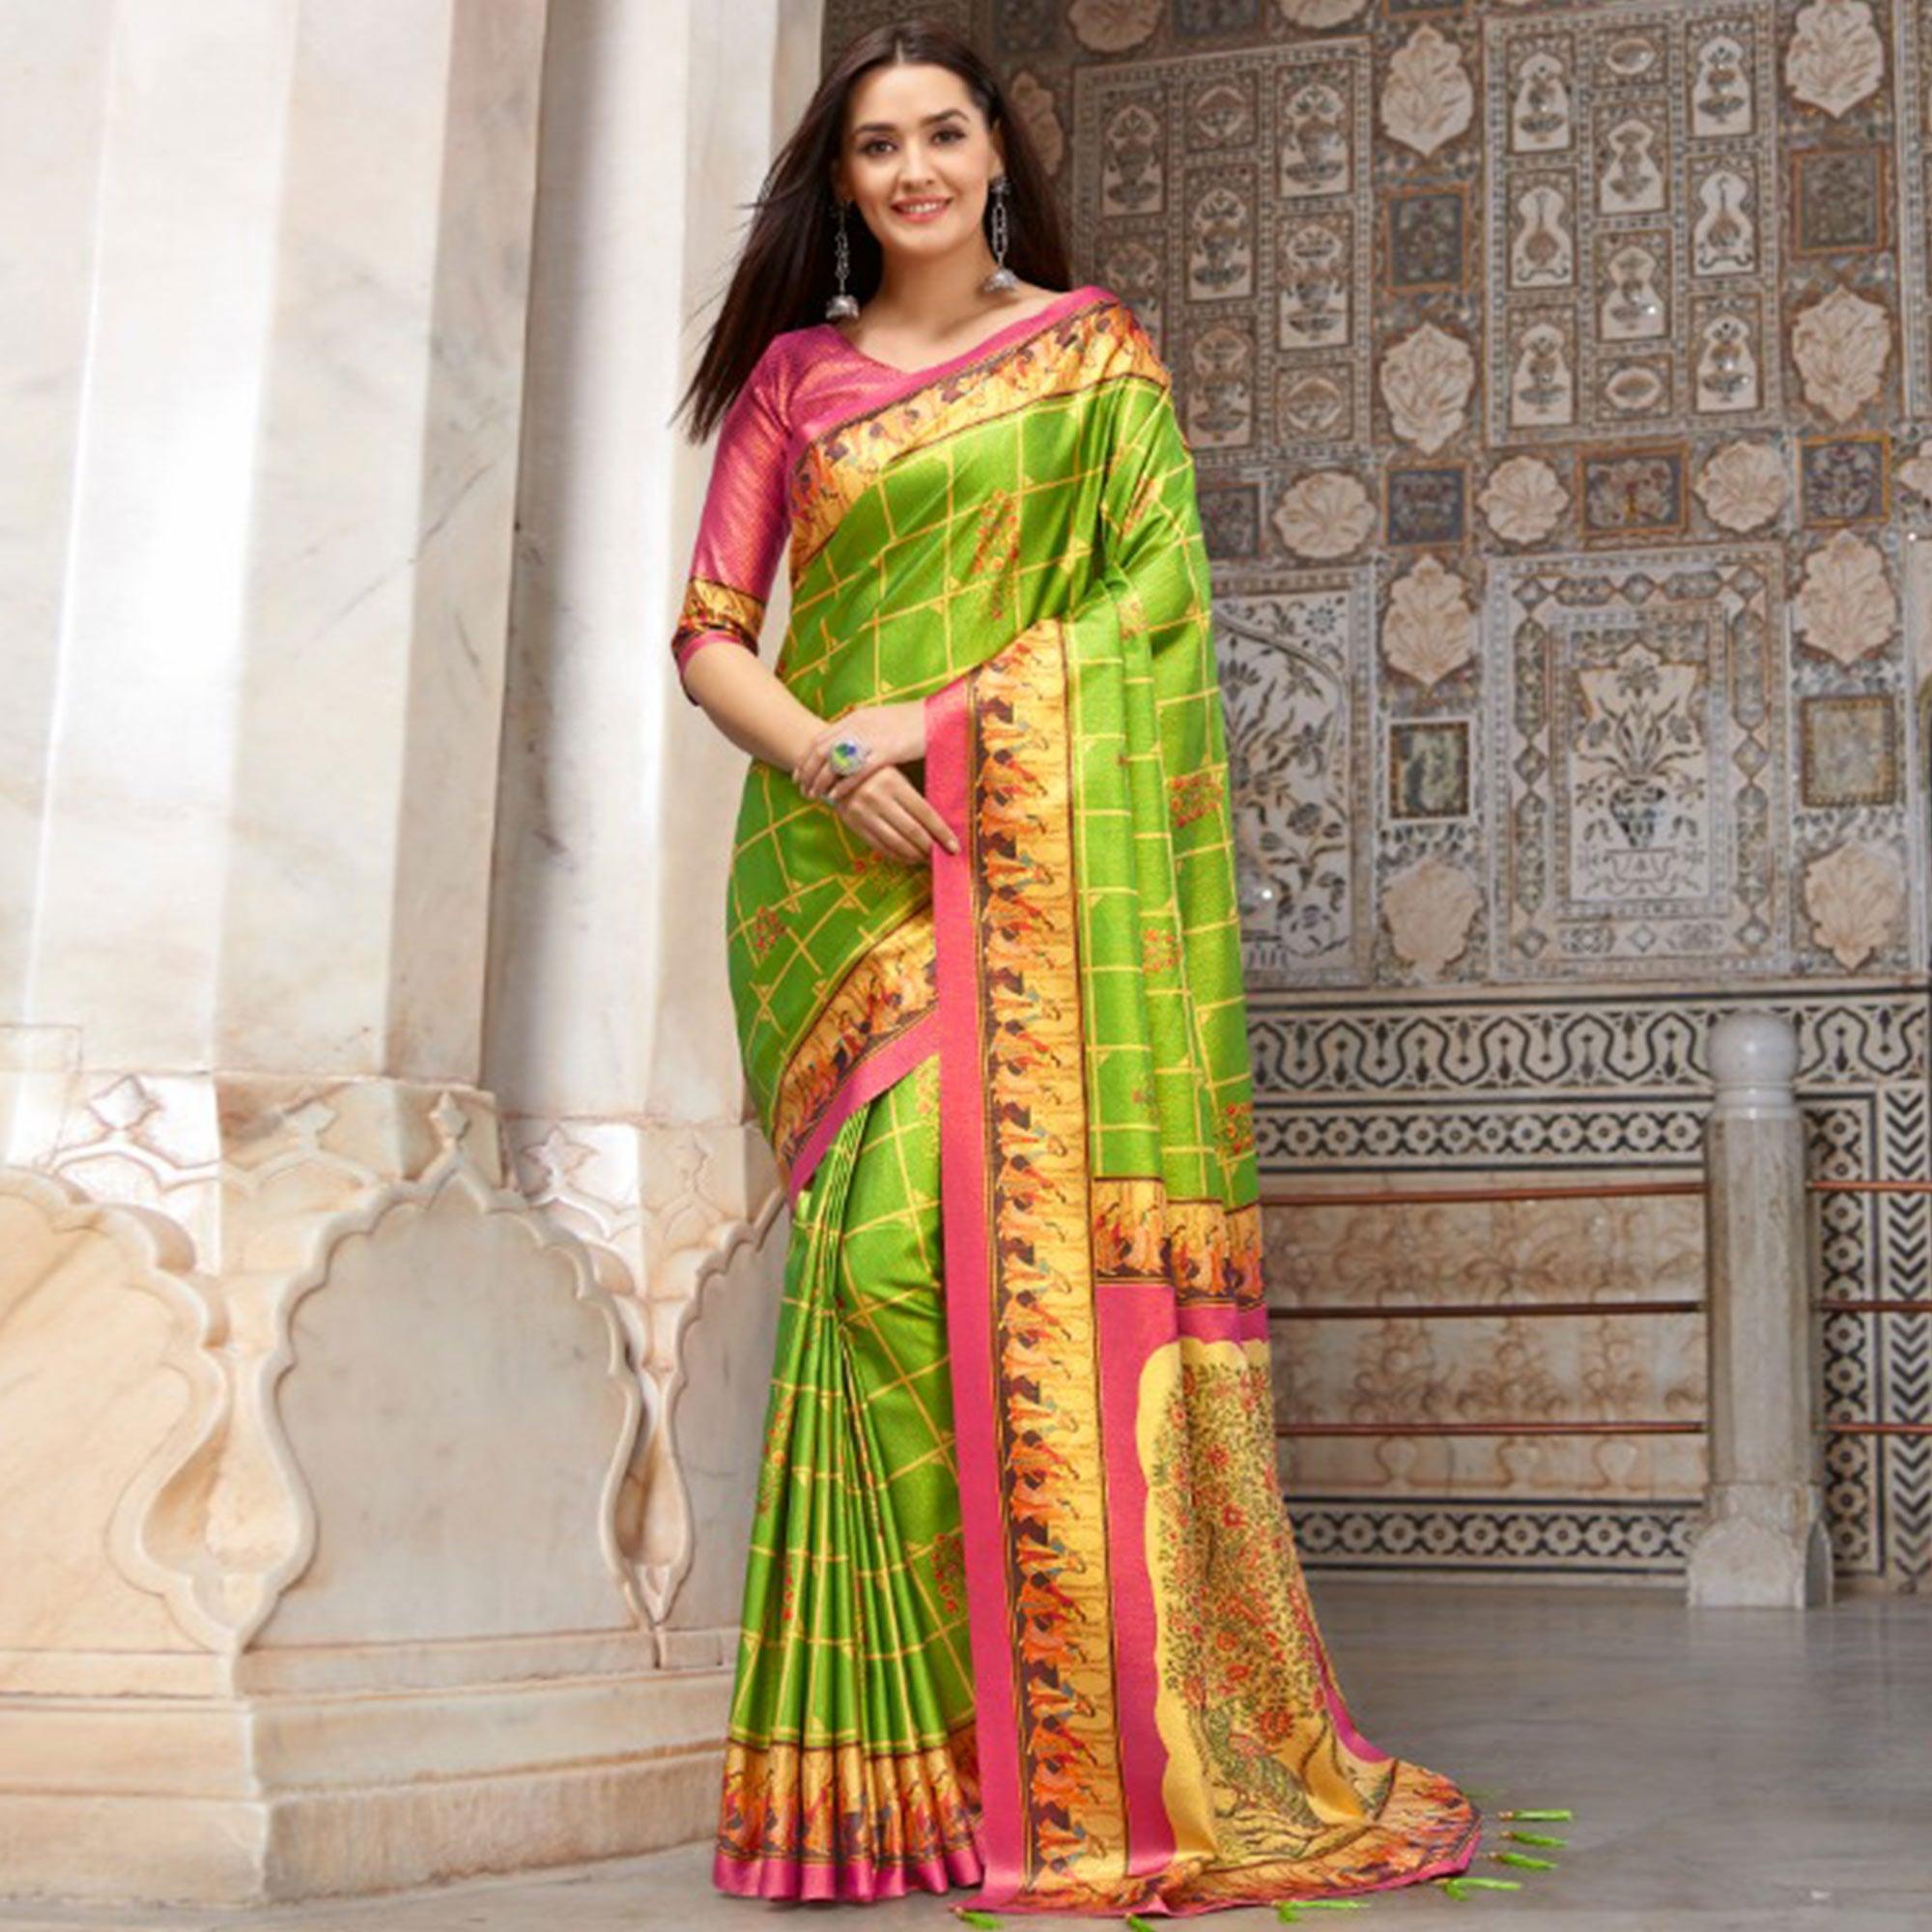 Hypnotic Green Colored Casual Wear Printed Silk Blend Saree With Tassels - Peachmode